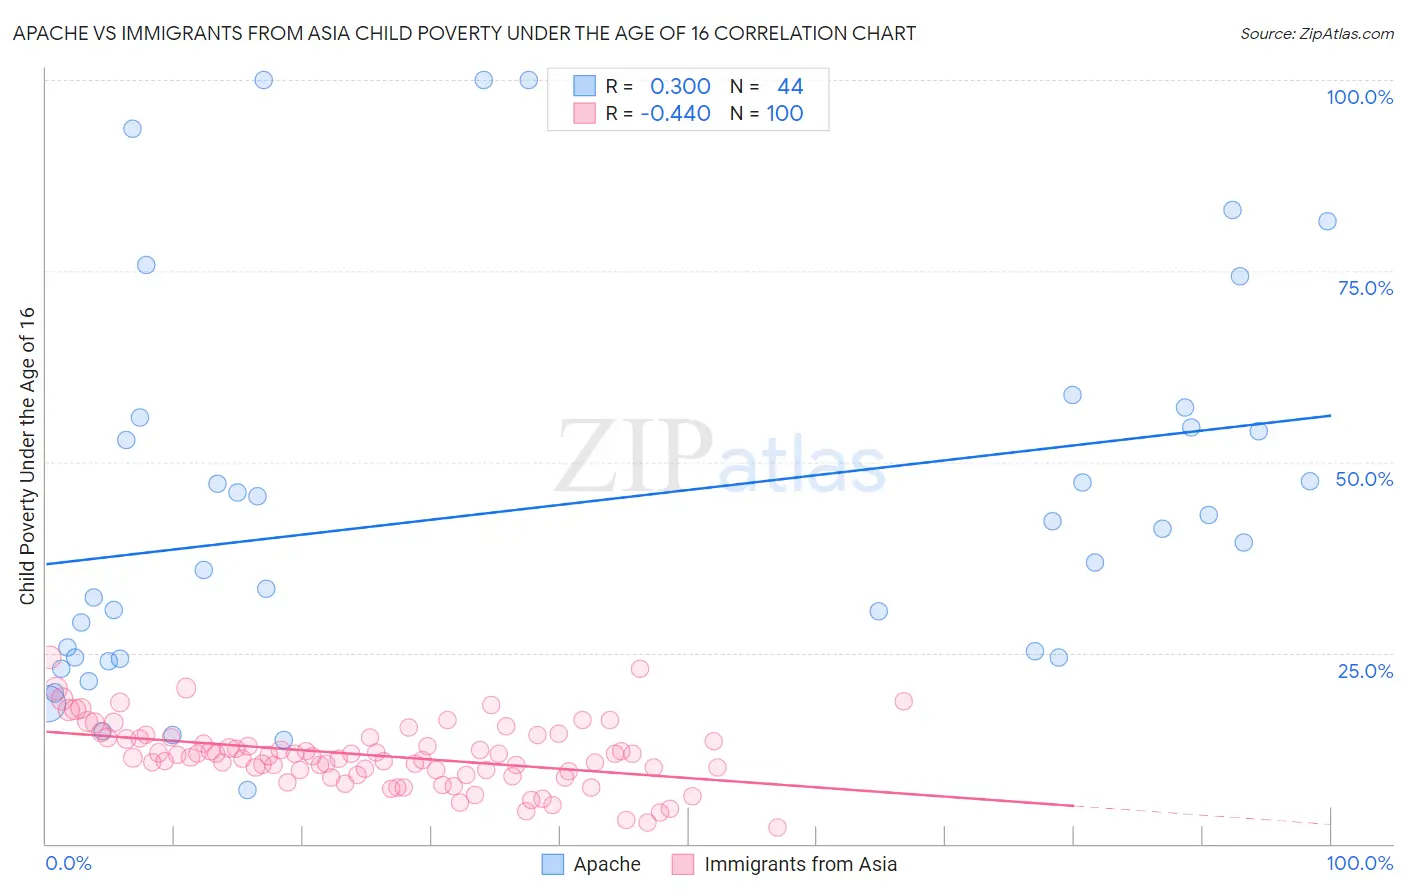 Apache vs Immigrants from Asia Child Poverty Under the Age of 16